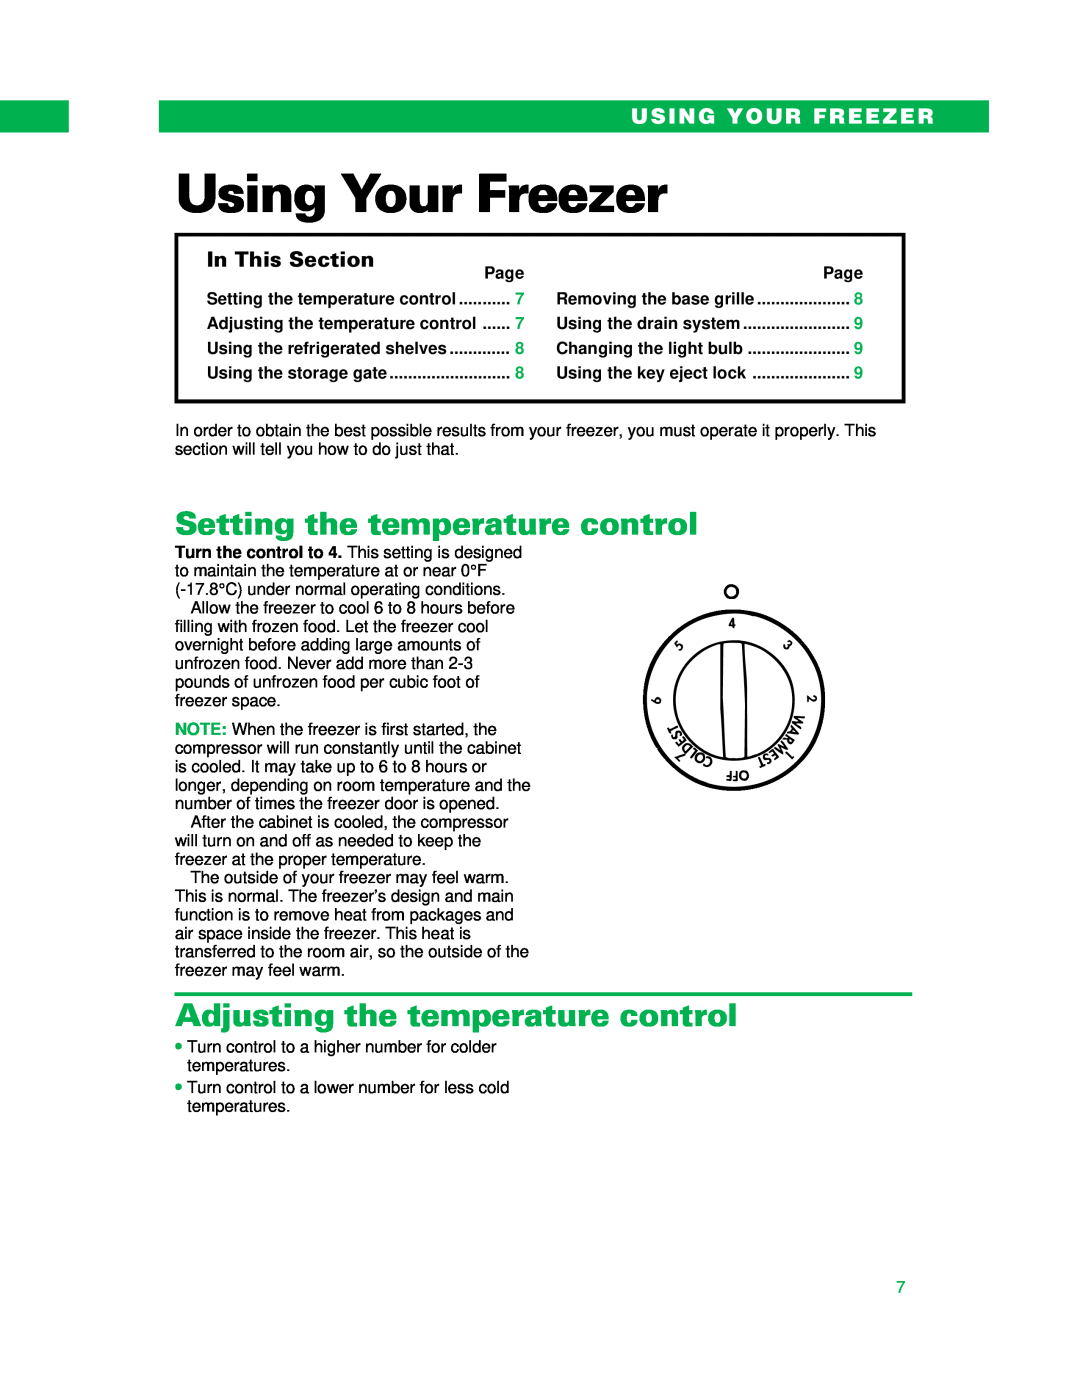 Whirlpool UPRIGHT FREEZER Using Your Freezer, Setting the temperature control, Adjusting the temperature control, Page 